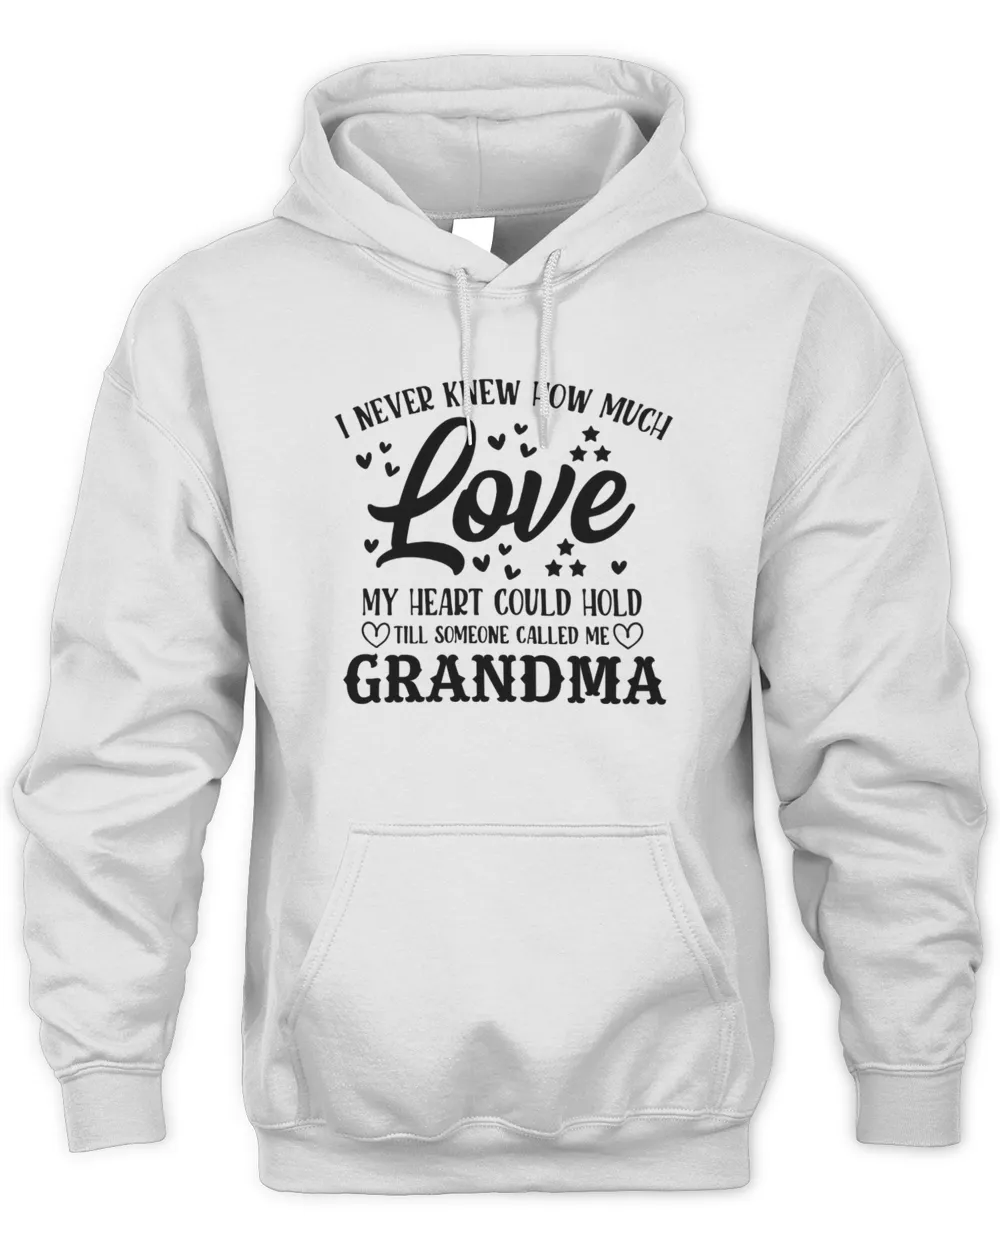 I Never Knew How Much Love My Heart Could Hold 'Til Someone Called Me Grandma